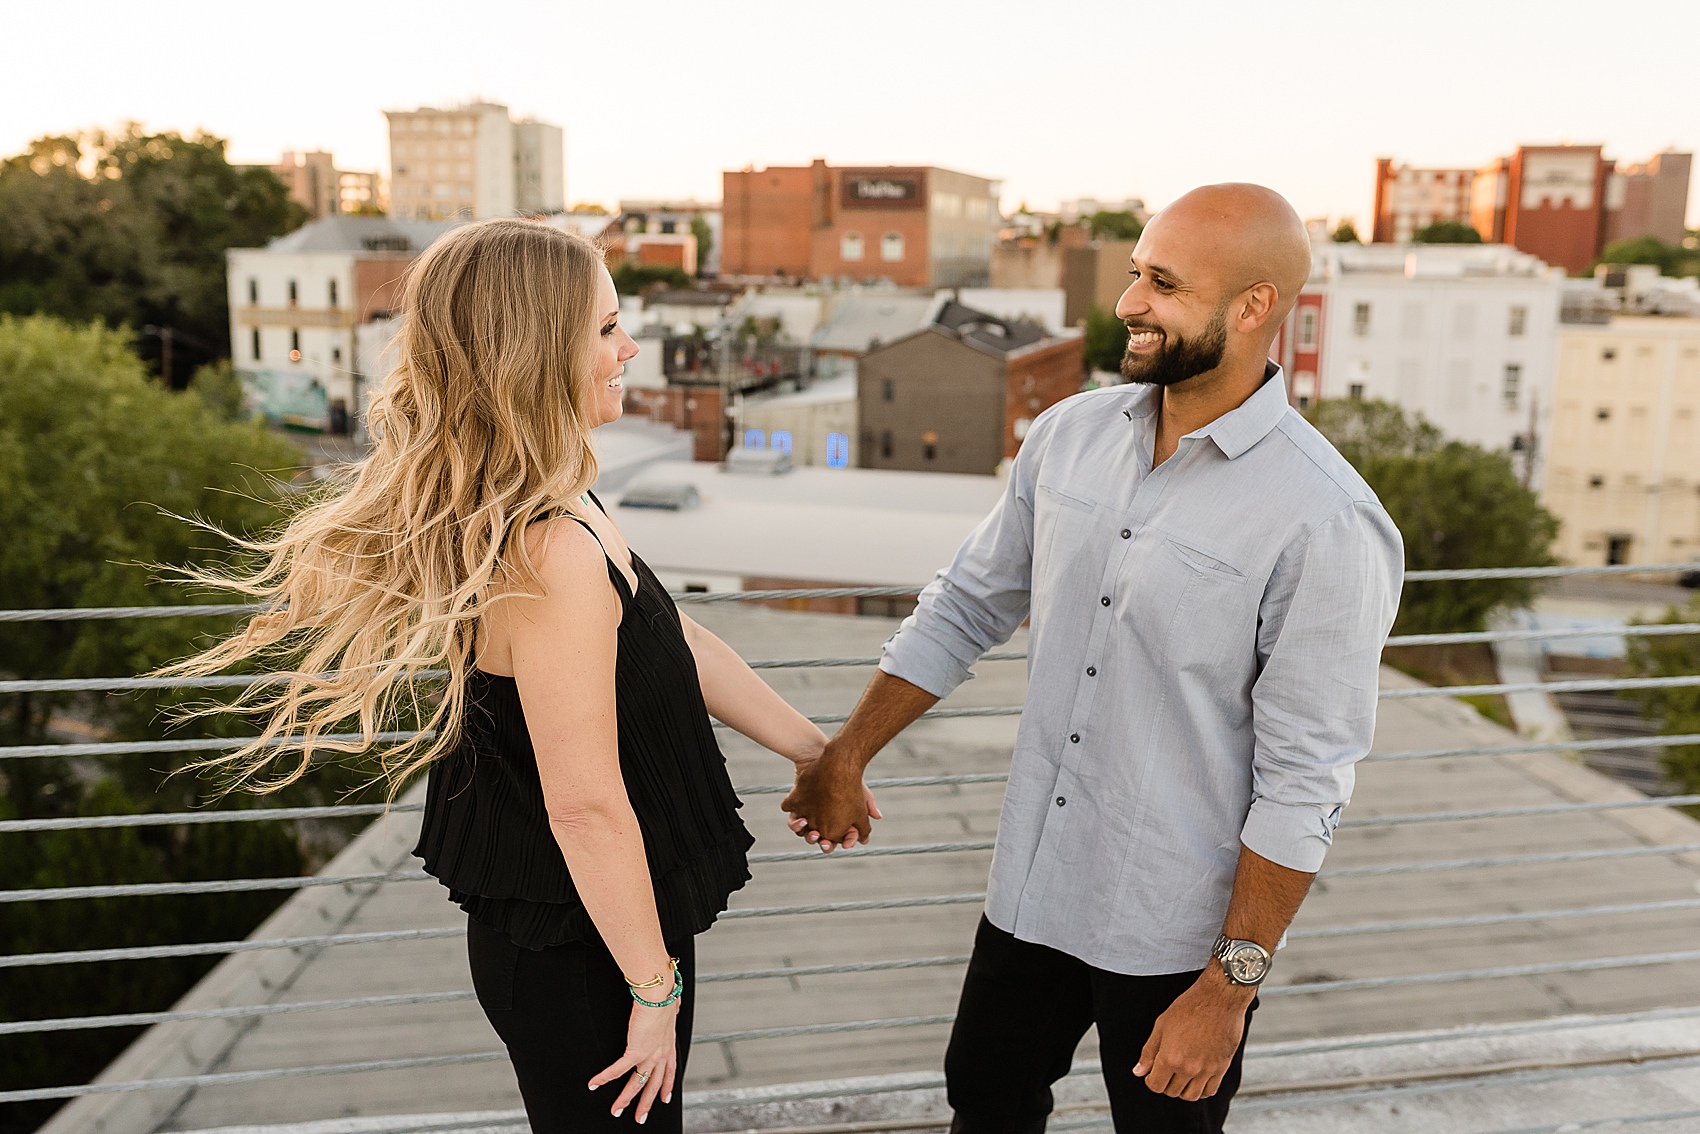 downtown athens georgia engagement rooftop